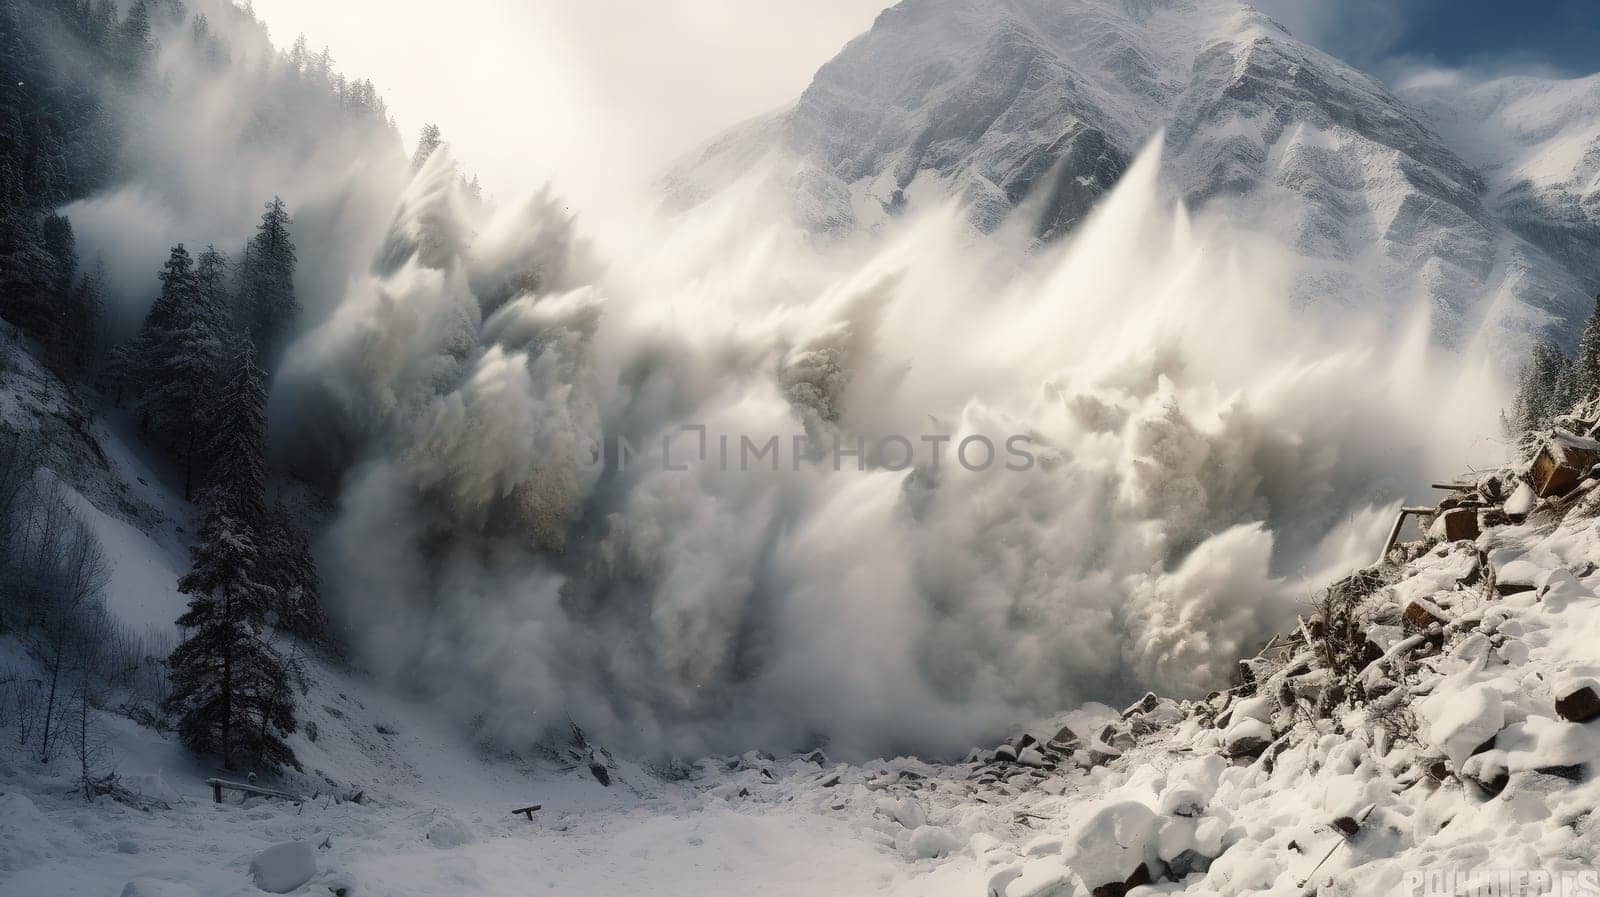 Huge snow avalanche, a mass of snow, ice, and rocks falling rapidly down a mountainside, nature concept by Kadula